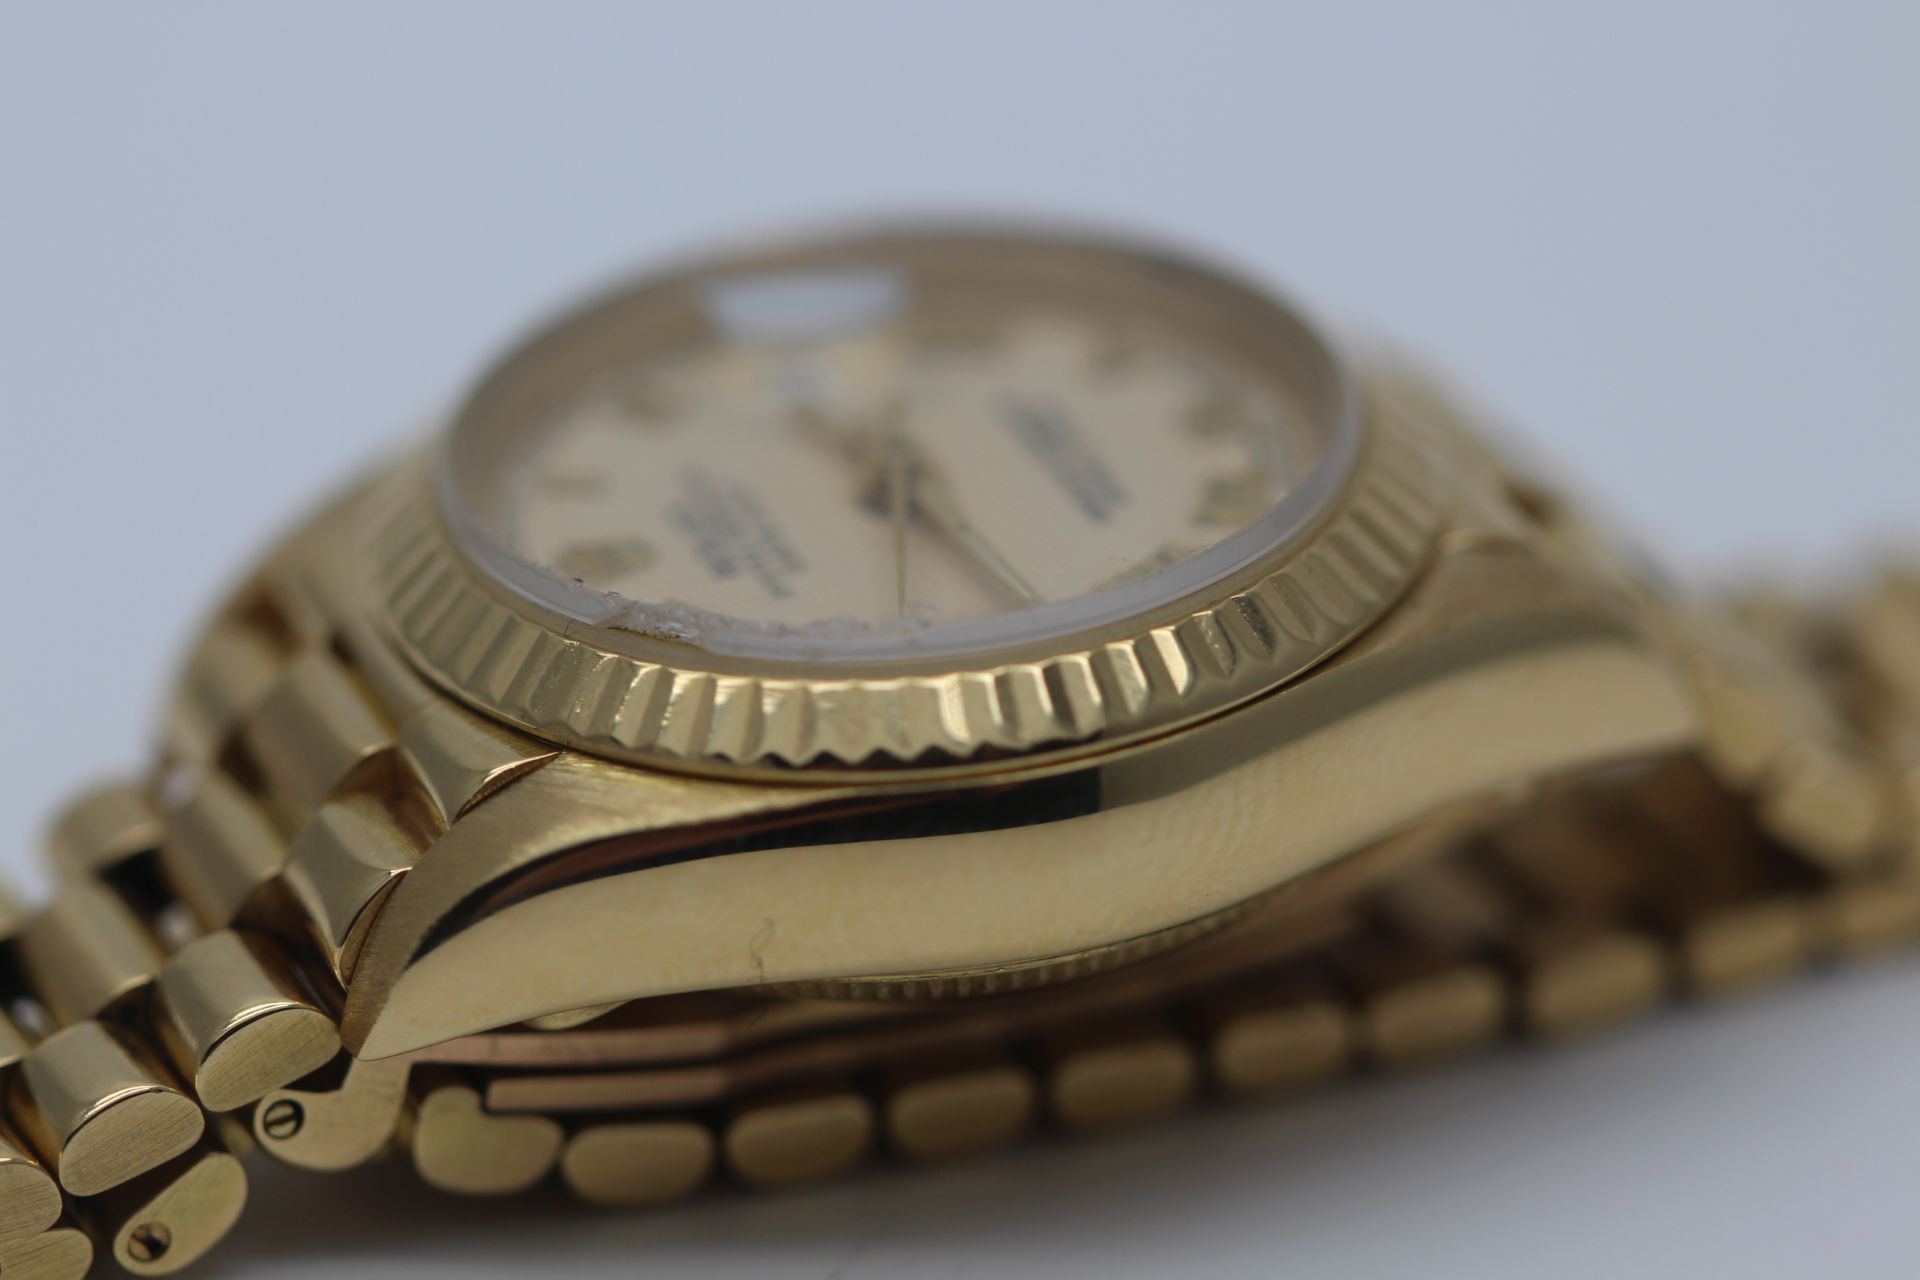 ROLEX, LADIES 18CT GOLD DATEJUST SET WITH CREME DIAL - Image 6 of 9